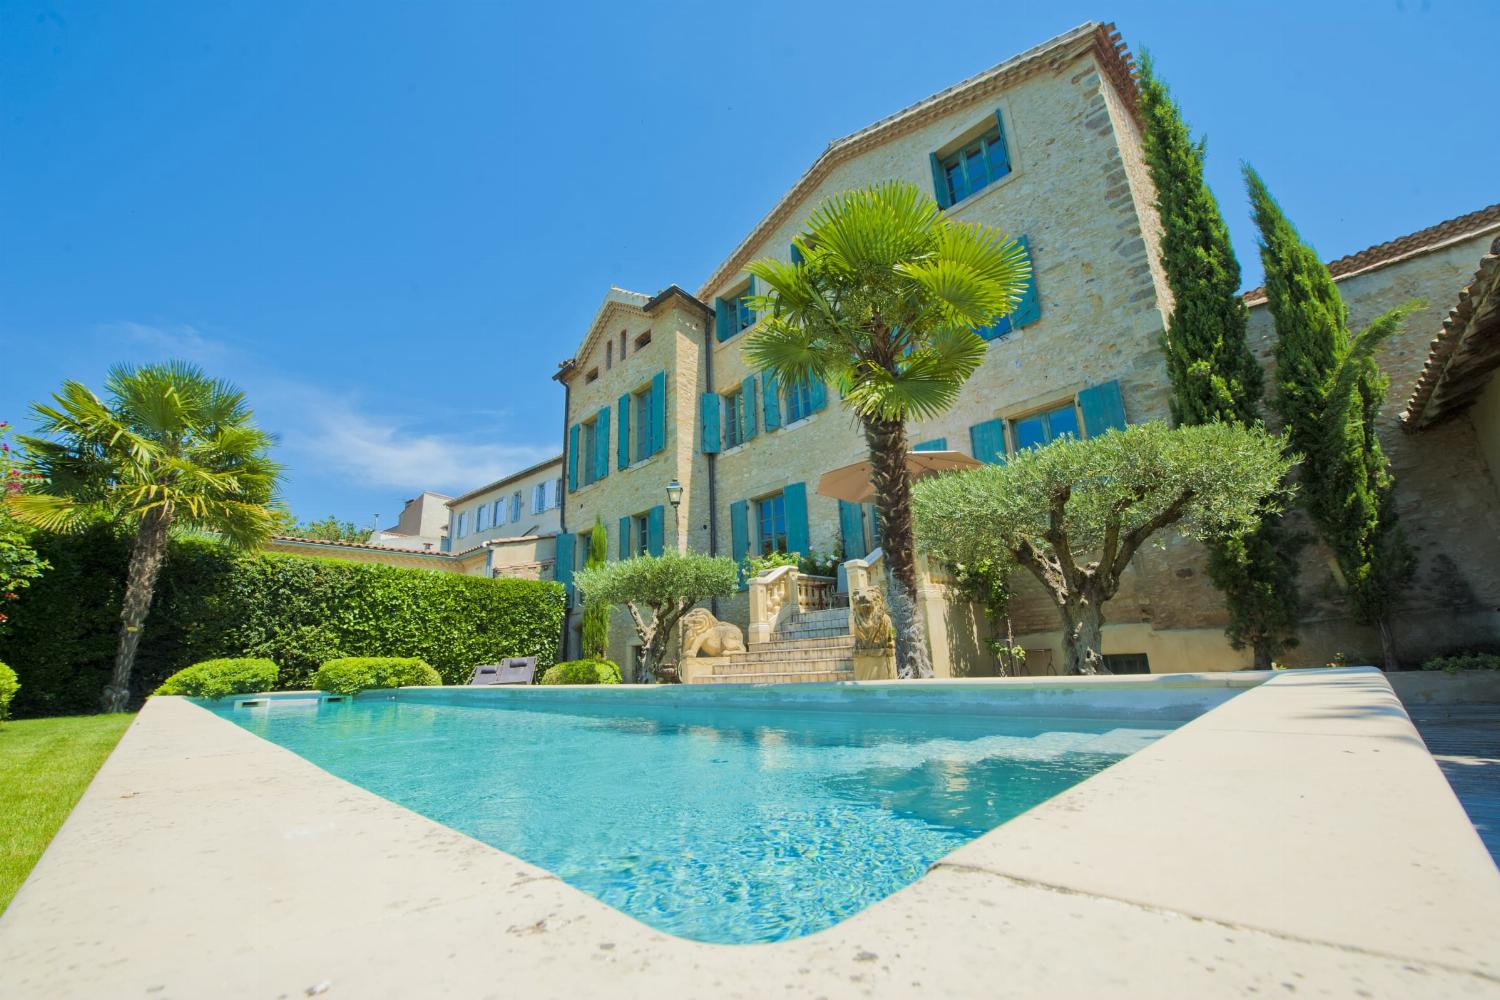 Rental home in South of France with private pool